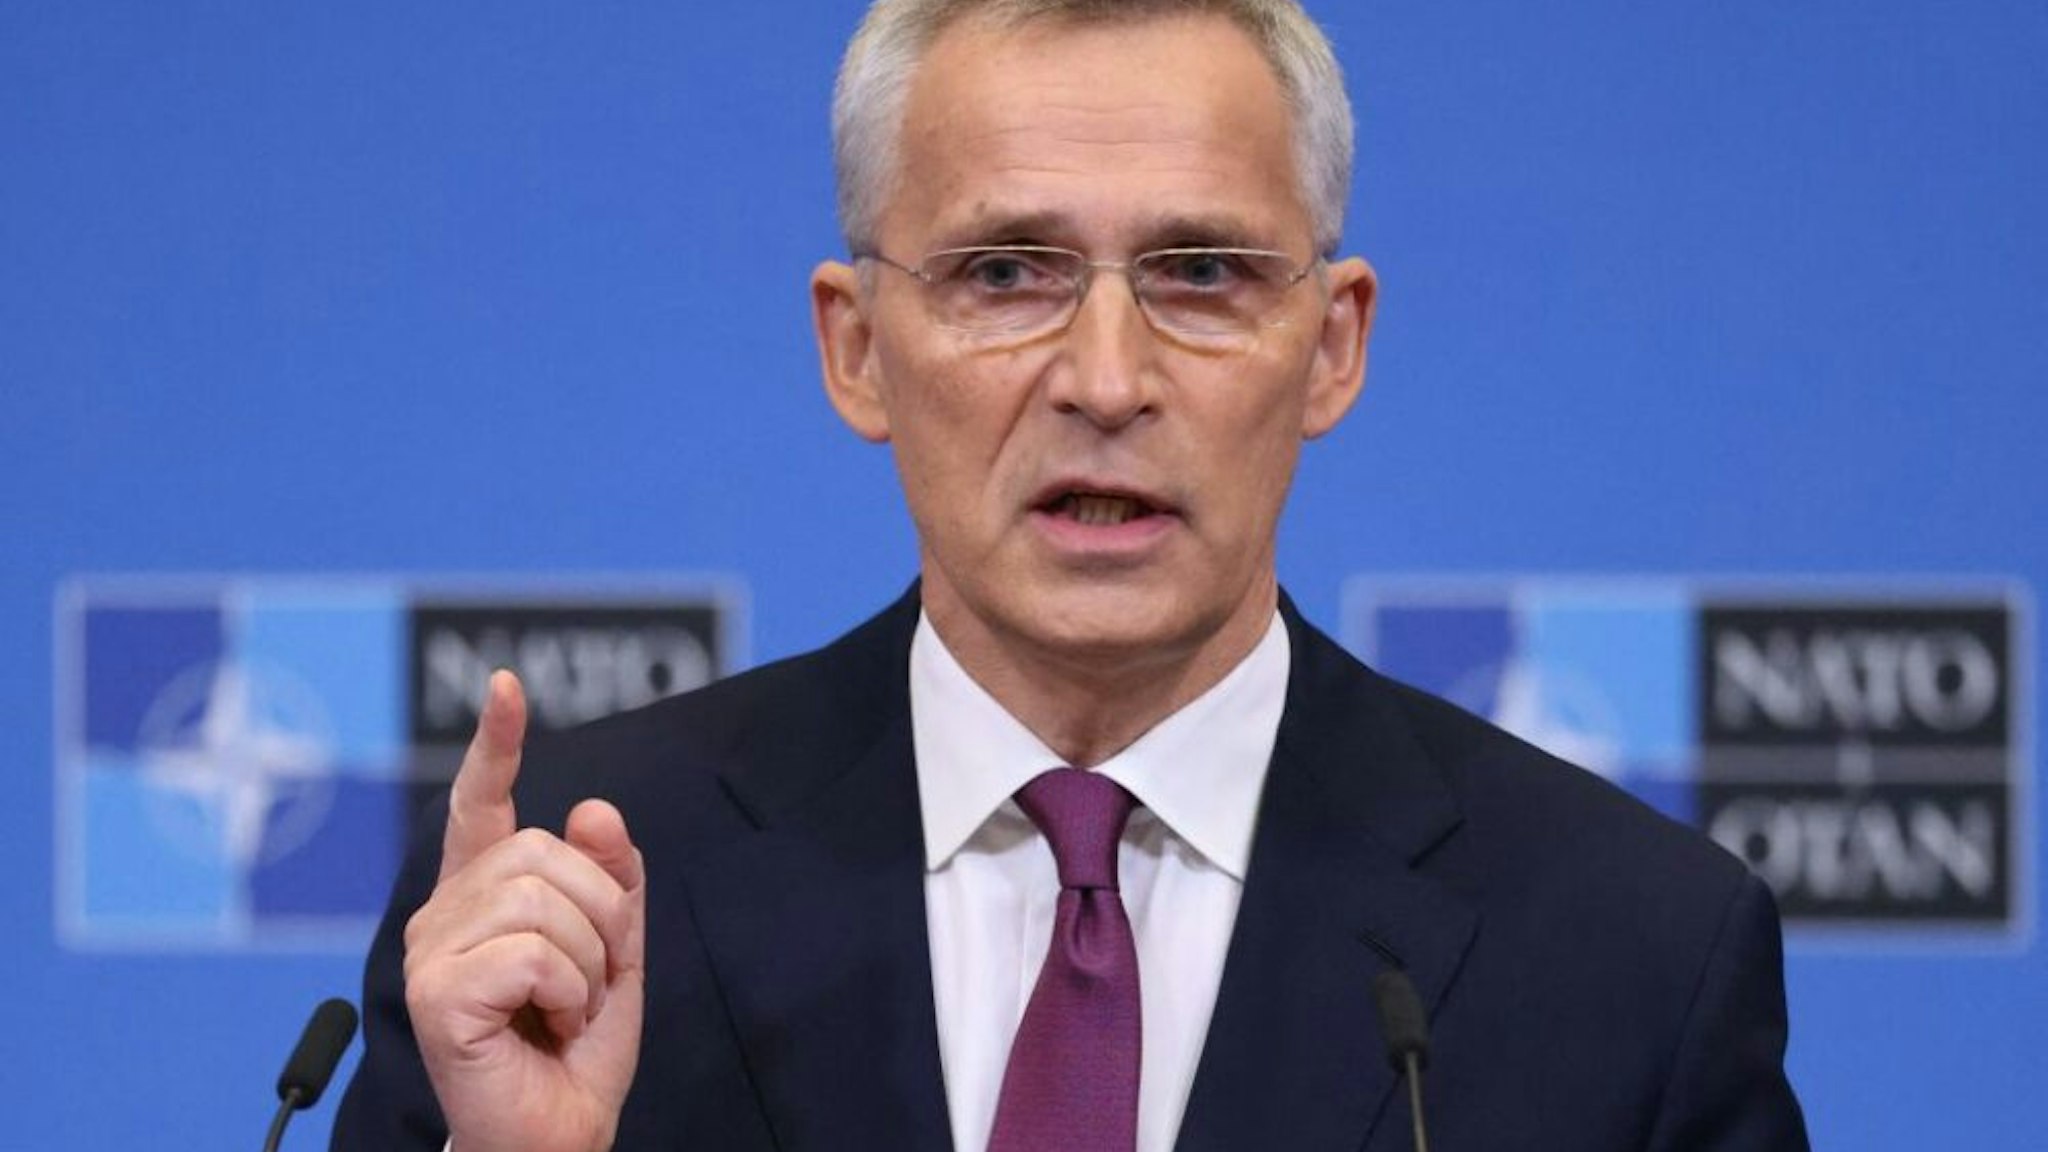 NATO Secretary General Jens Stoltenberg addresses a press conference at NATO Headquarters in Brussels on March 23, 2022.